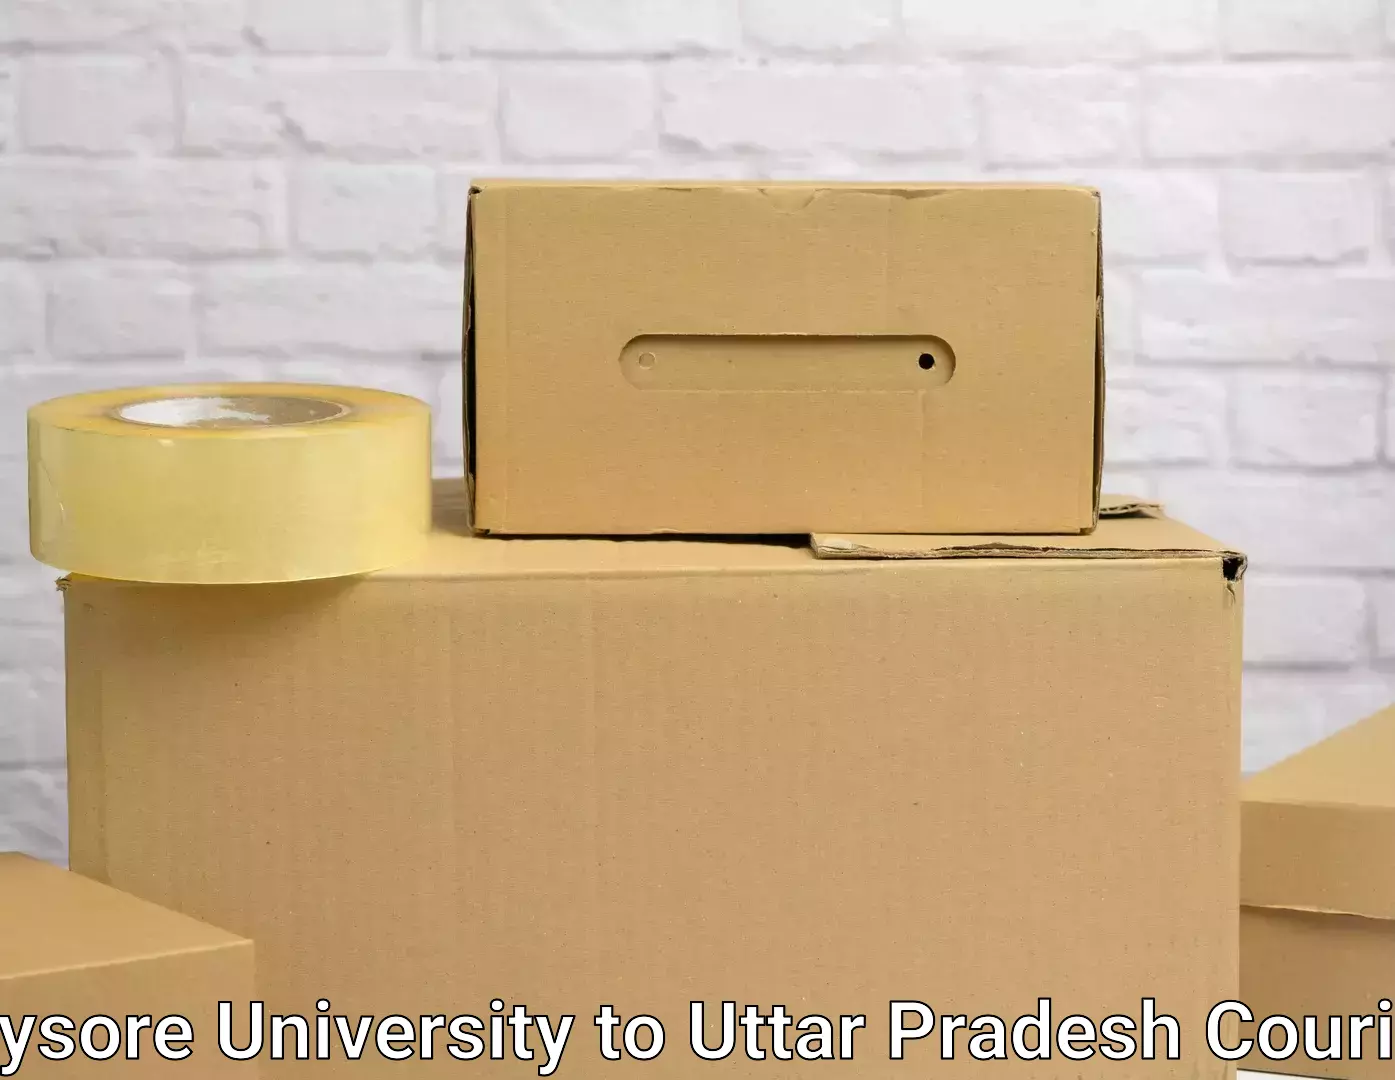 Local furniture movers Mysore University to King Georges Medical University Lucknow